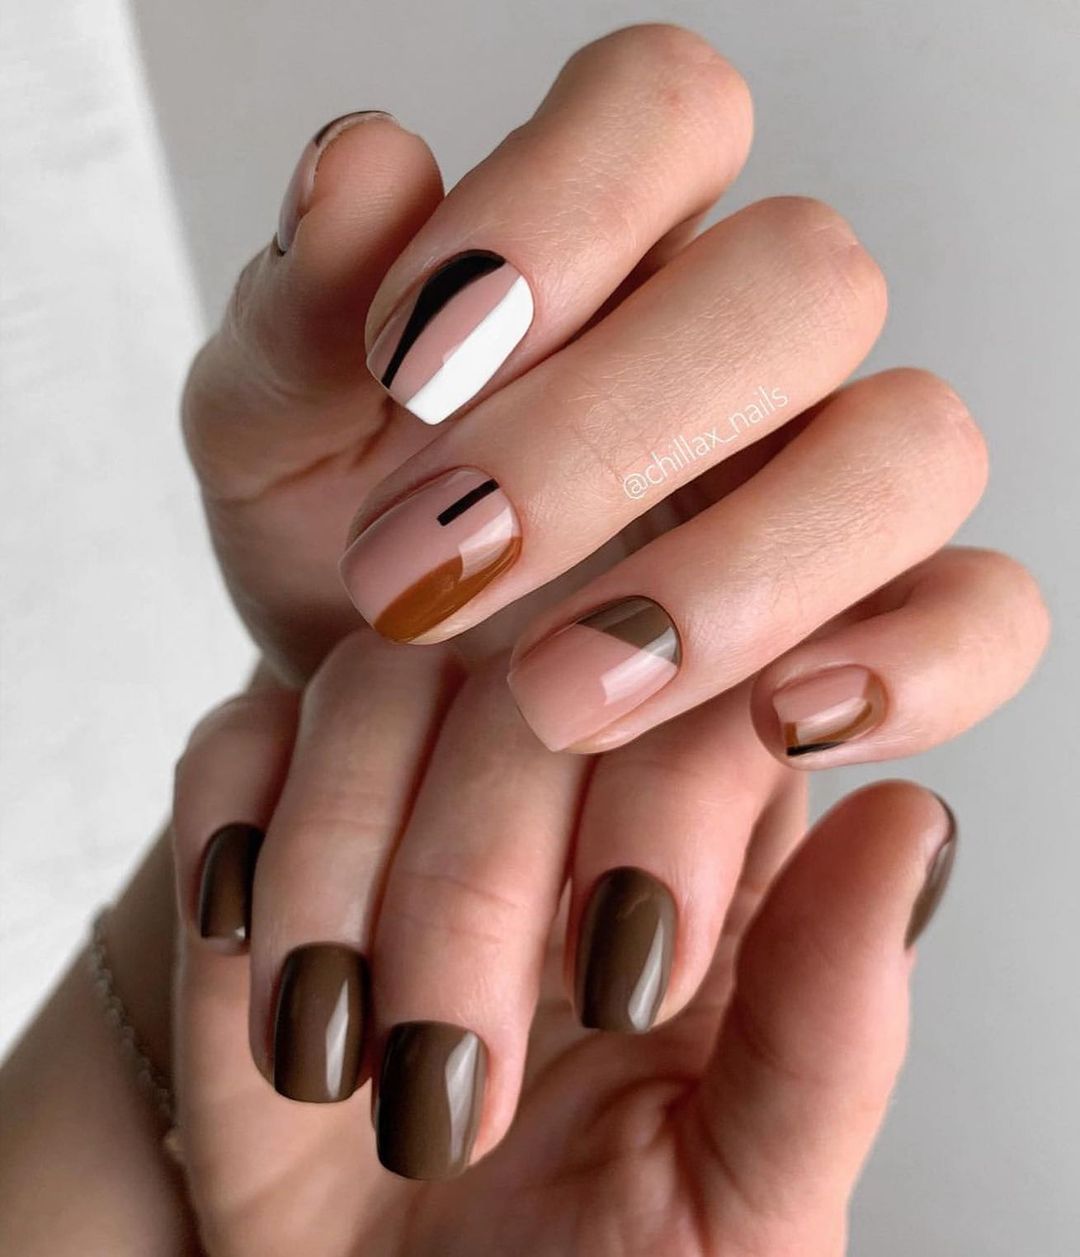 Short Square Gel Nails with Brown Polish Design